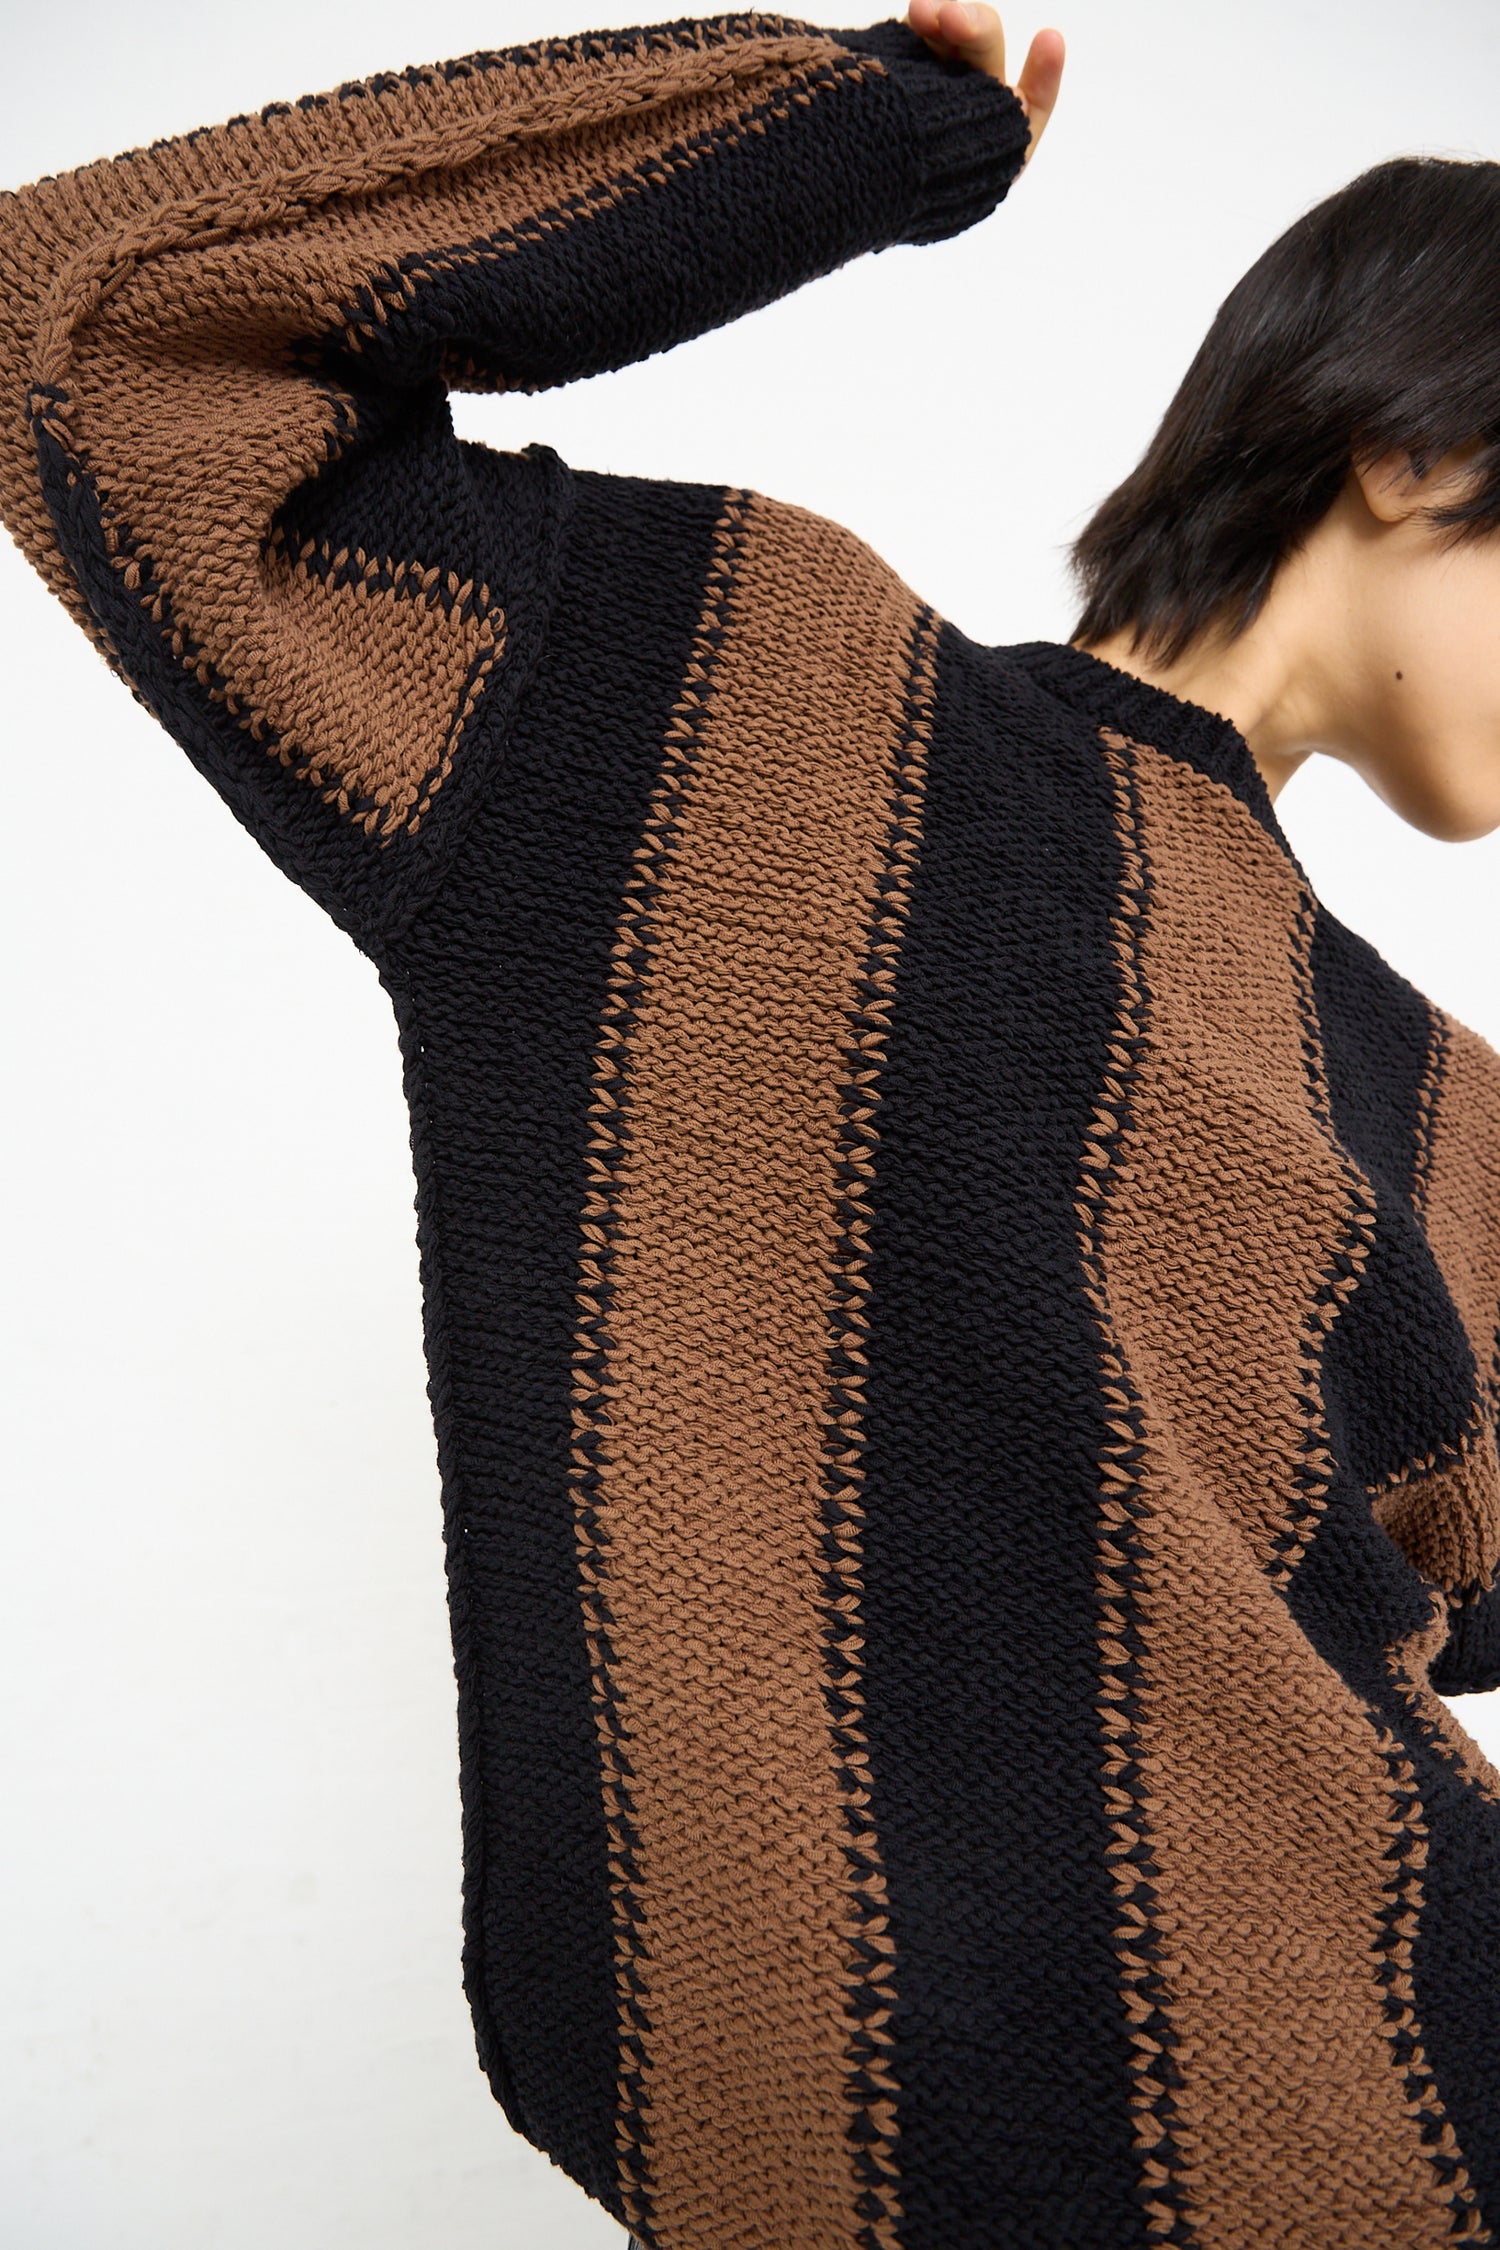 A model wearing a Fettuccia Striped Sweater in Black and Noisette by Cristaseya - OROBORO NYC